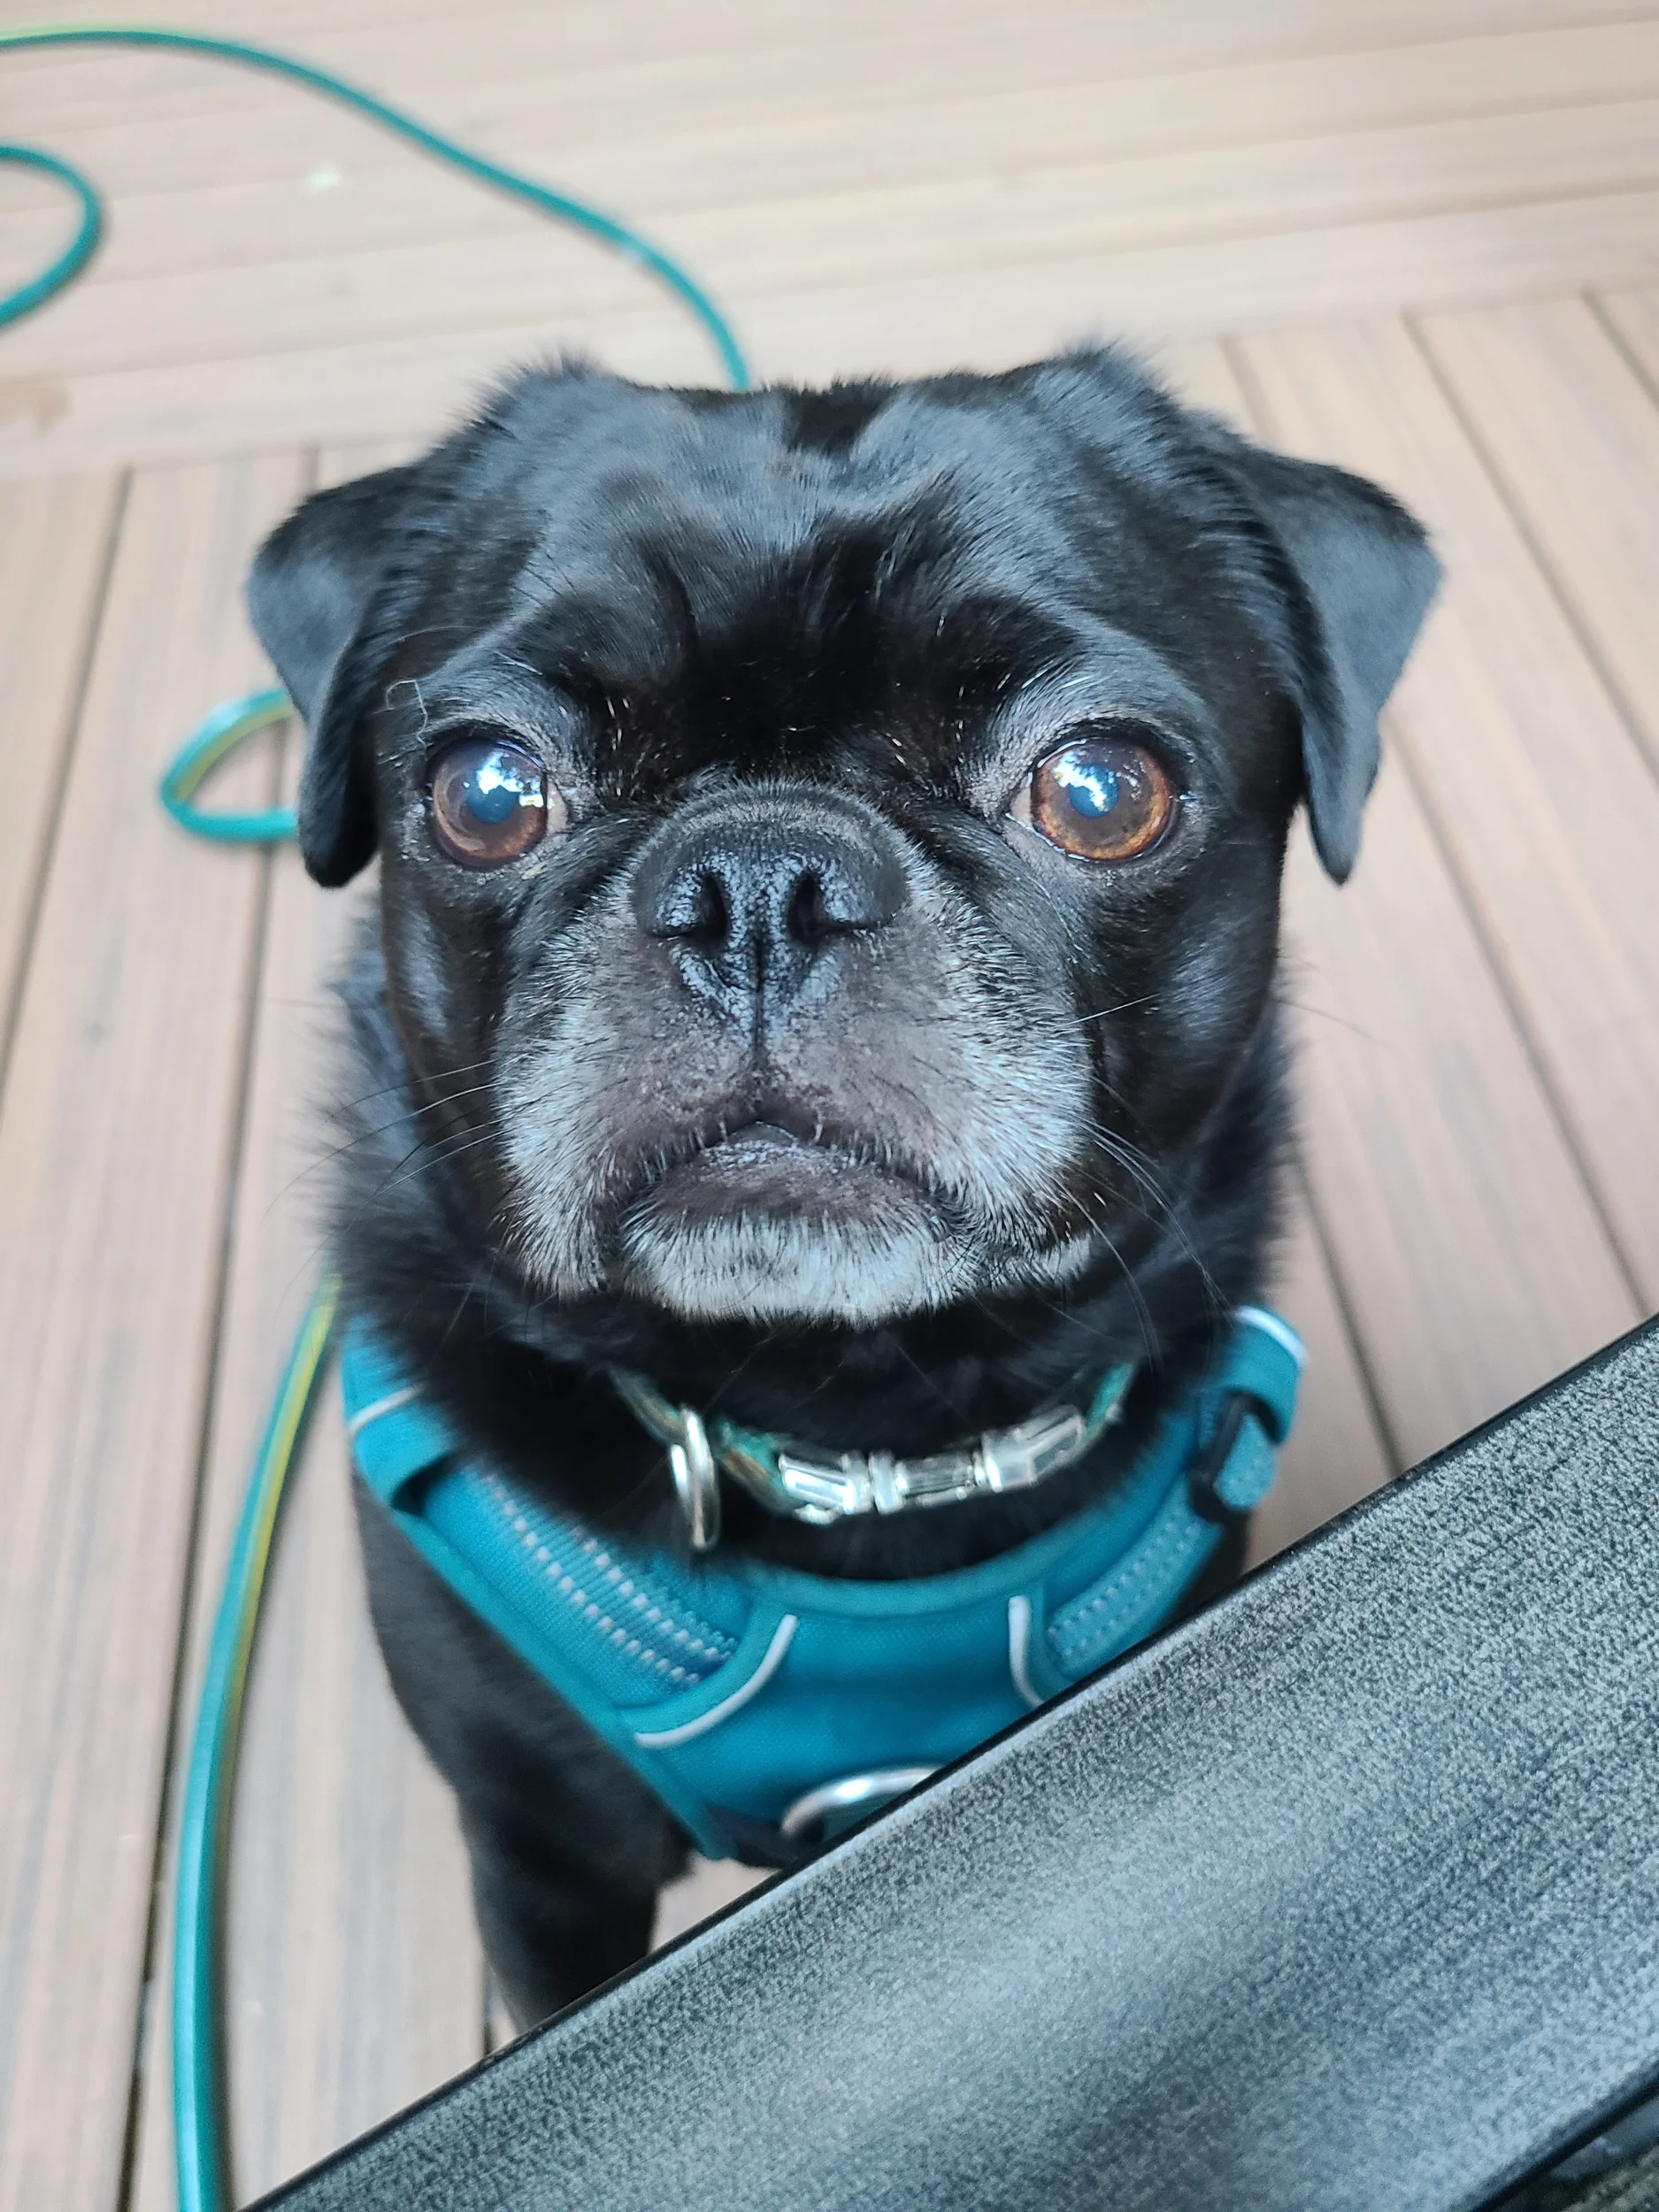 A New project – Pugs Photos